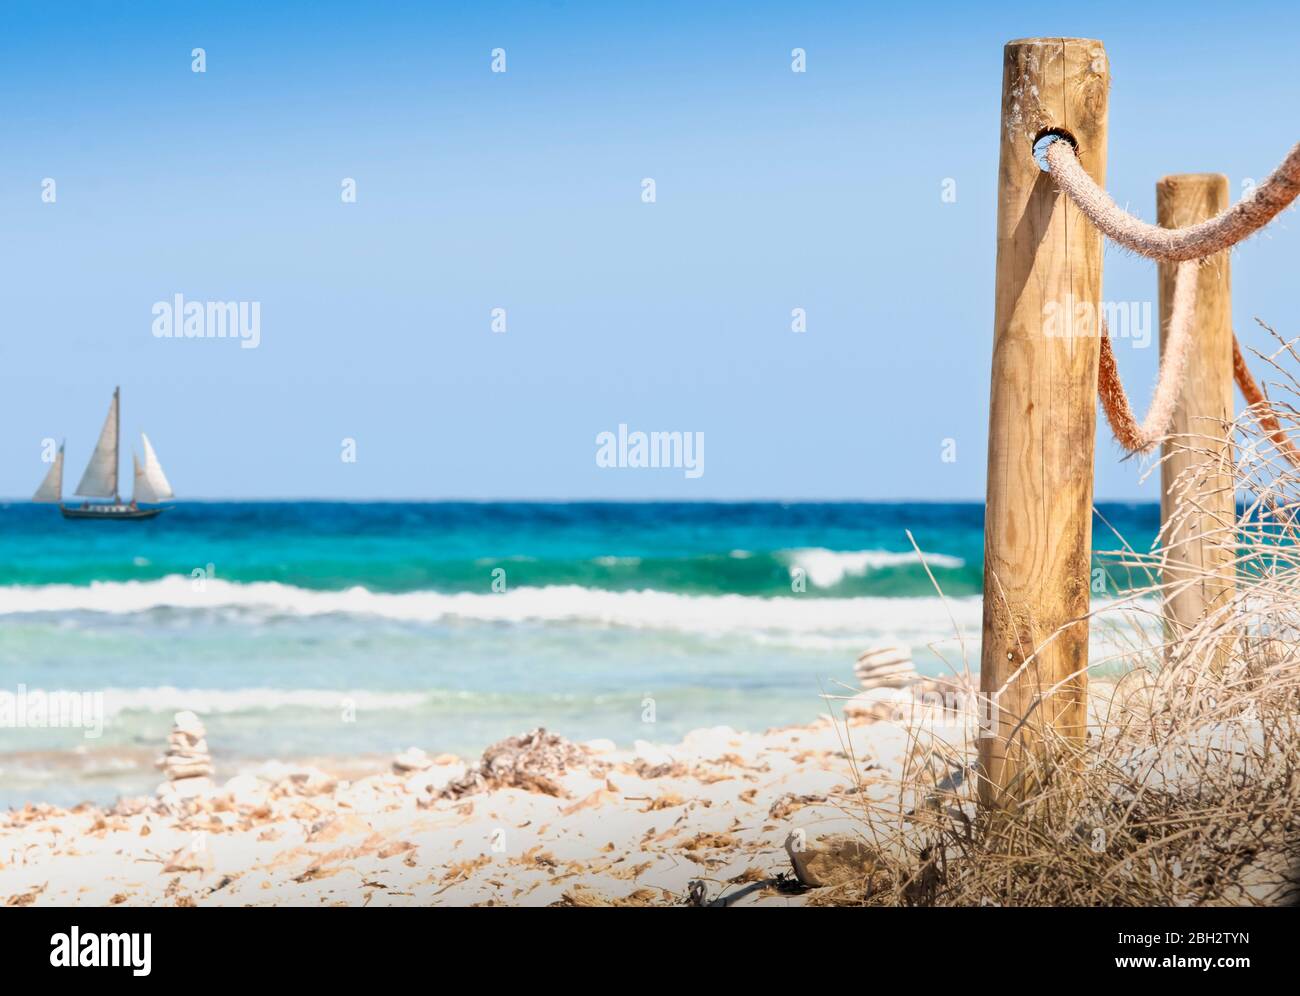 Rustic fence with wooden poles and rope on a deserted beach, in the background the rough sea. A wild beach in the island of Formentera Spain Stock Photo